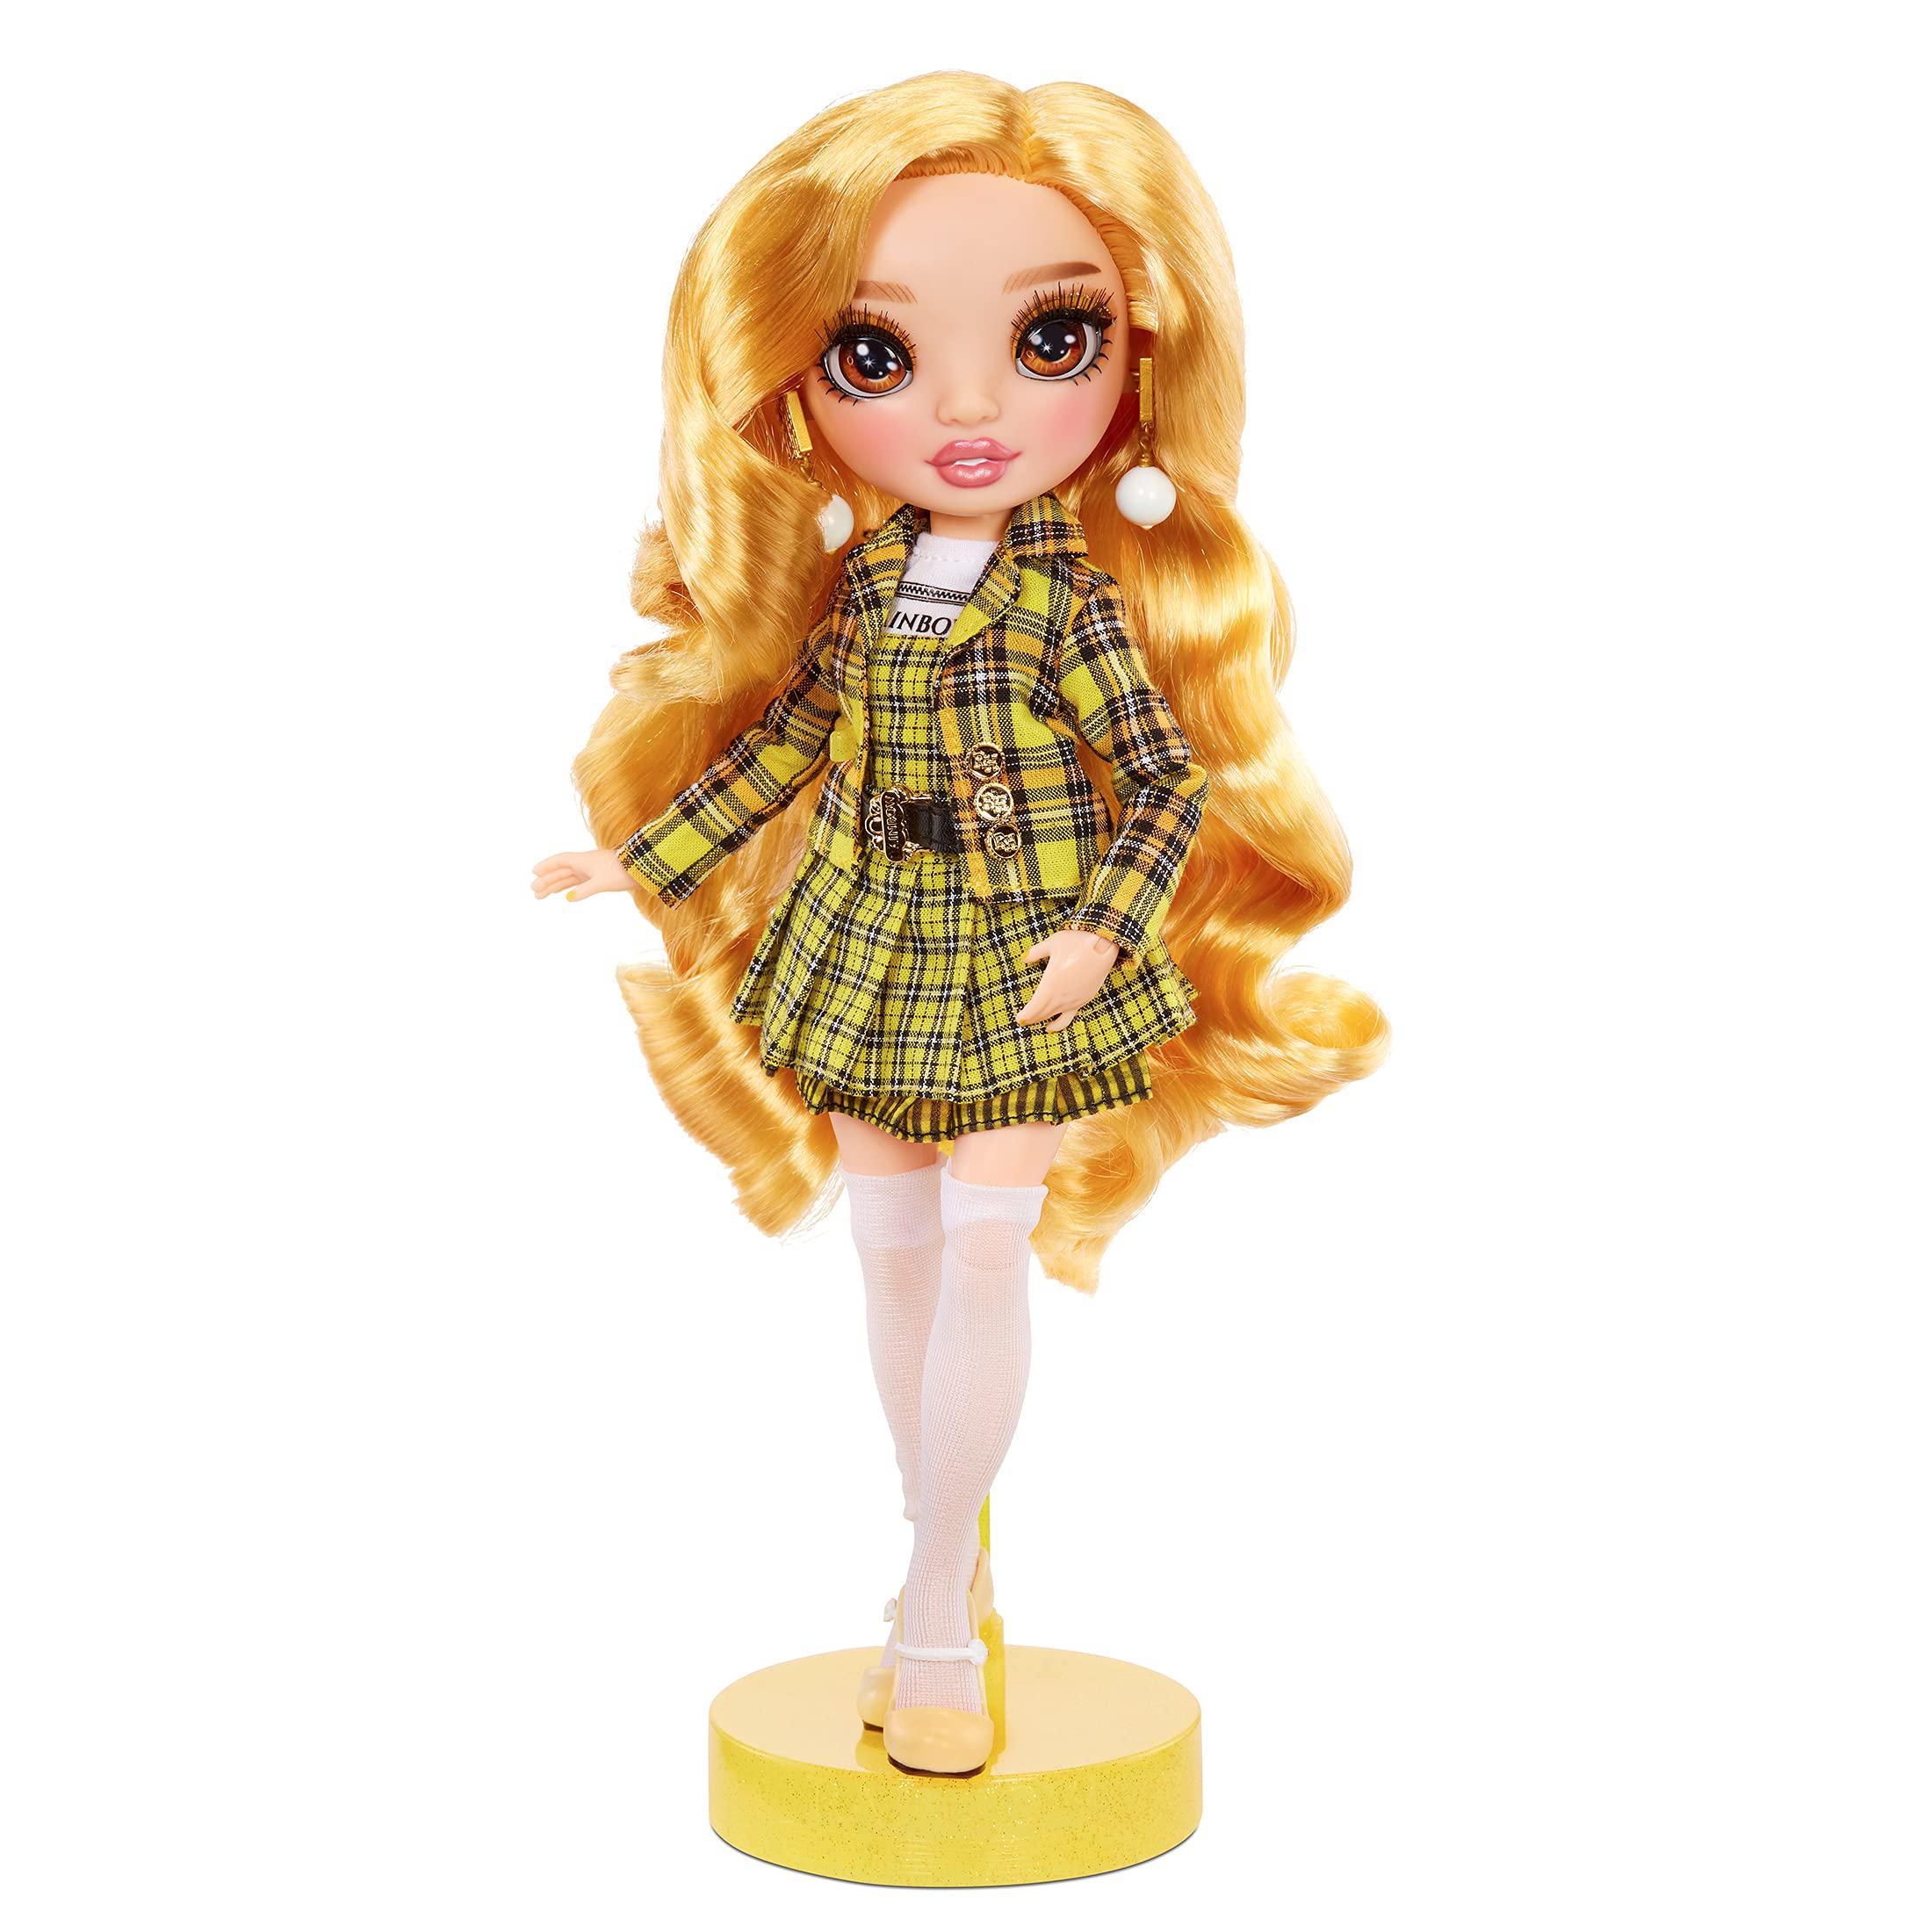 rainbow high series 3 sheryl meyer fashion doll - marigold (yellow) with 2 designer outfits to mix & match with accessories, 